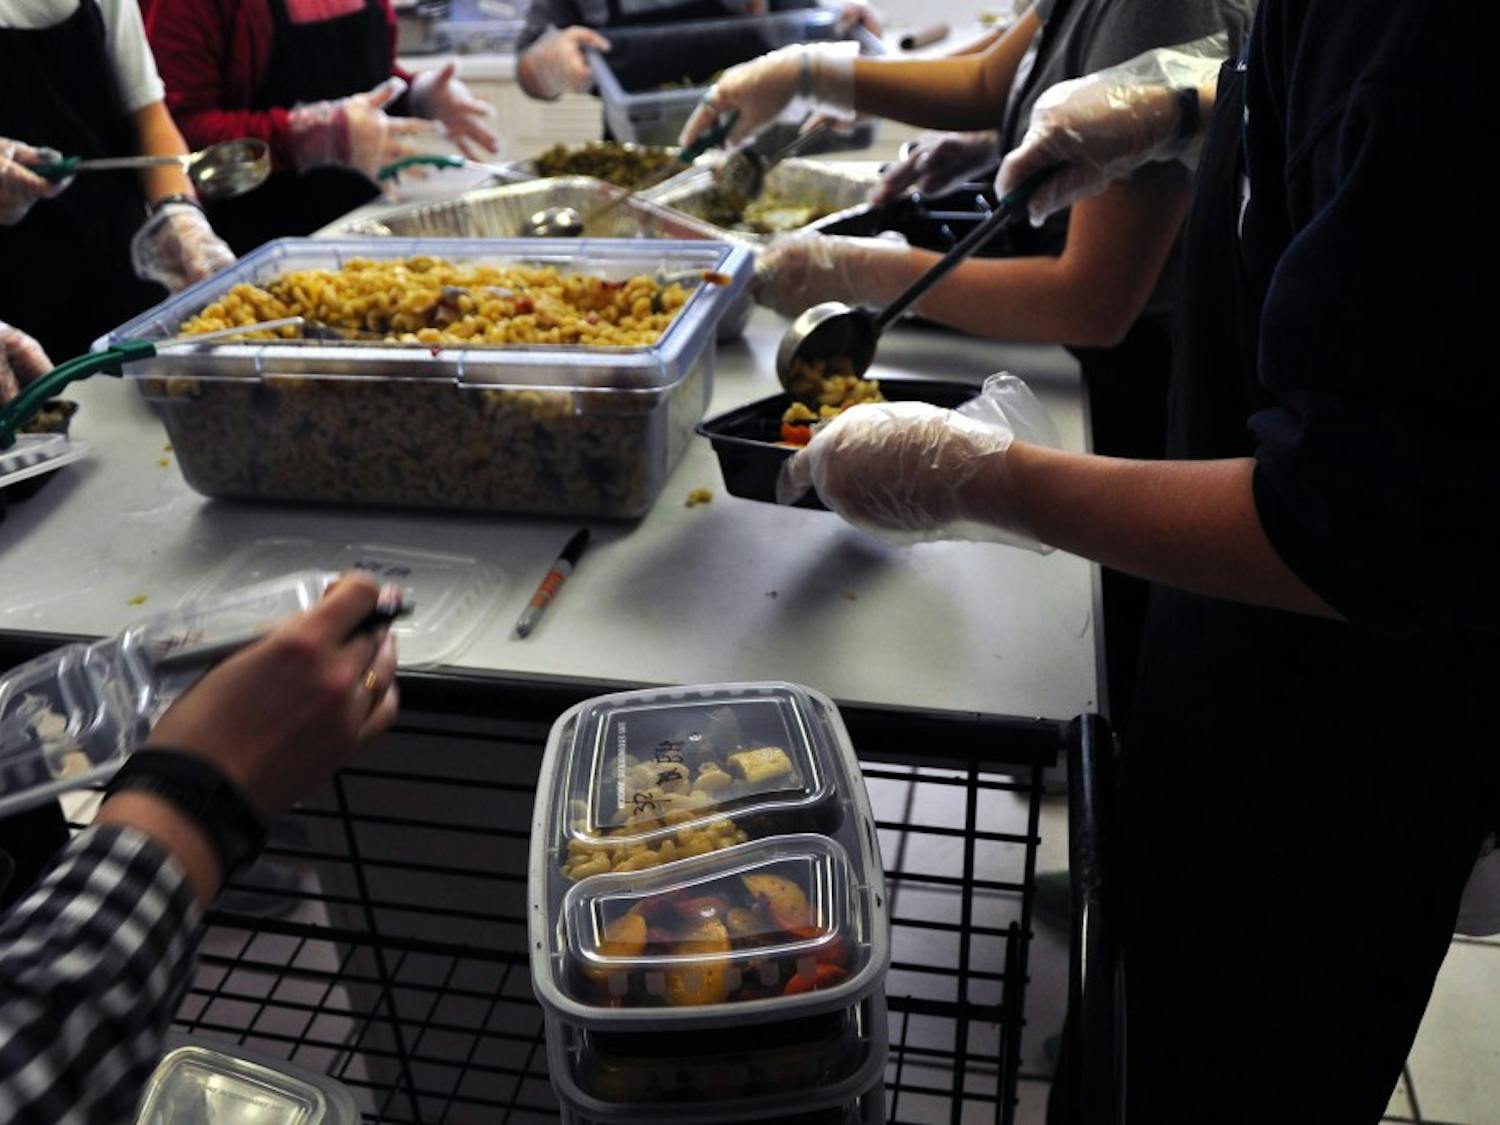 Student prepare meals at The Campus Kitchen on March 2, 2017, in Auburn, Ala. The organization repackages unserved food from dining venues into to-go meals for people in need, including students.